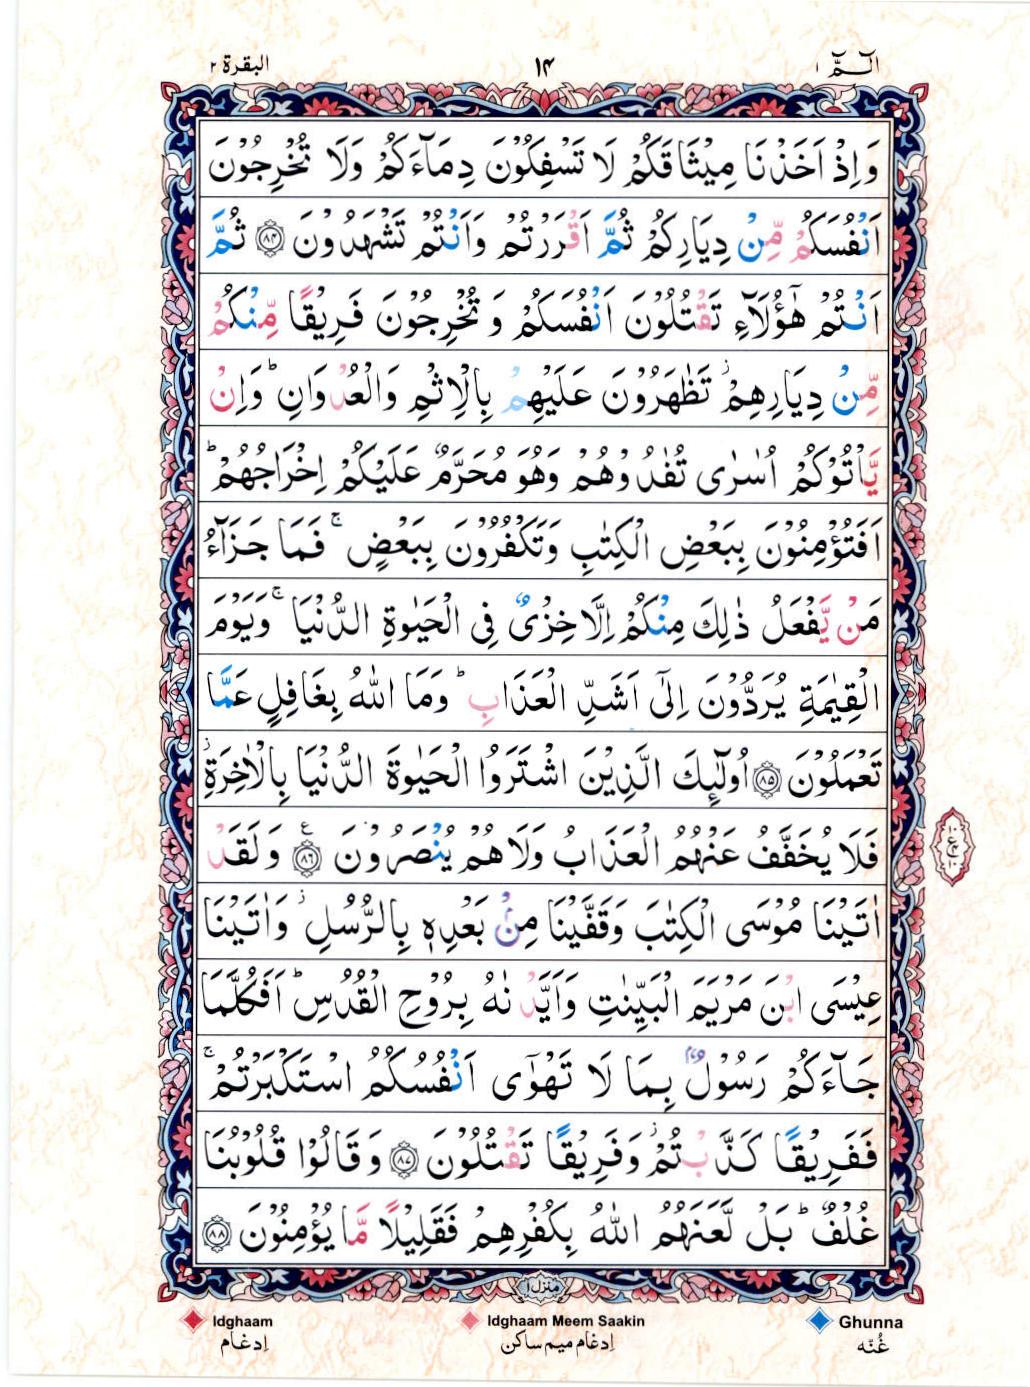 Read 15 Lines Coloured Coded Quran Part 1 Page No 14, Practice Quran